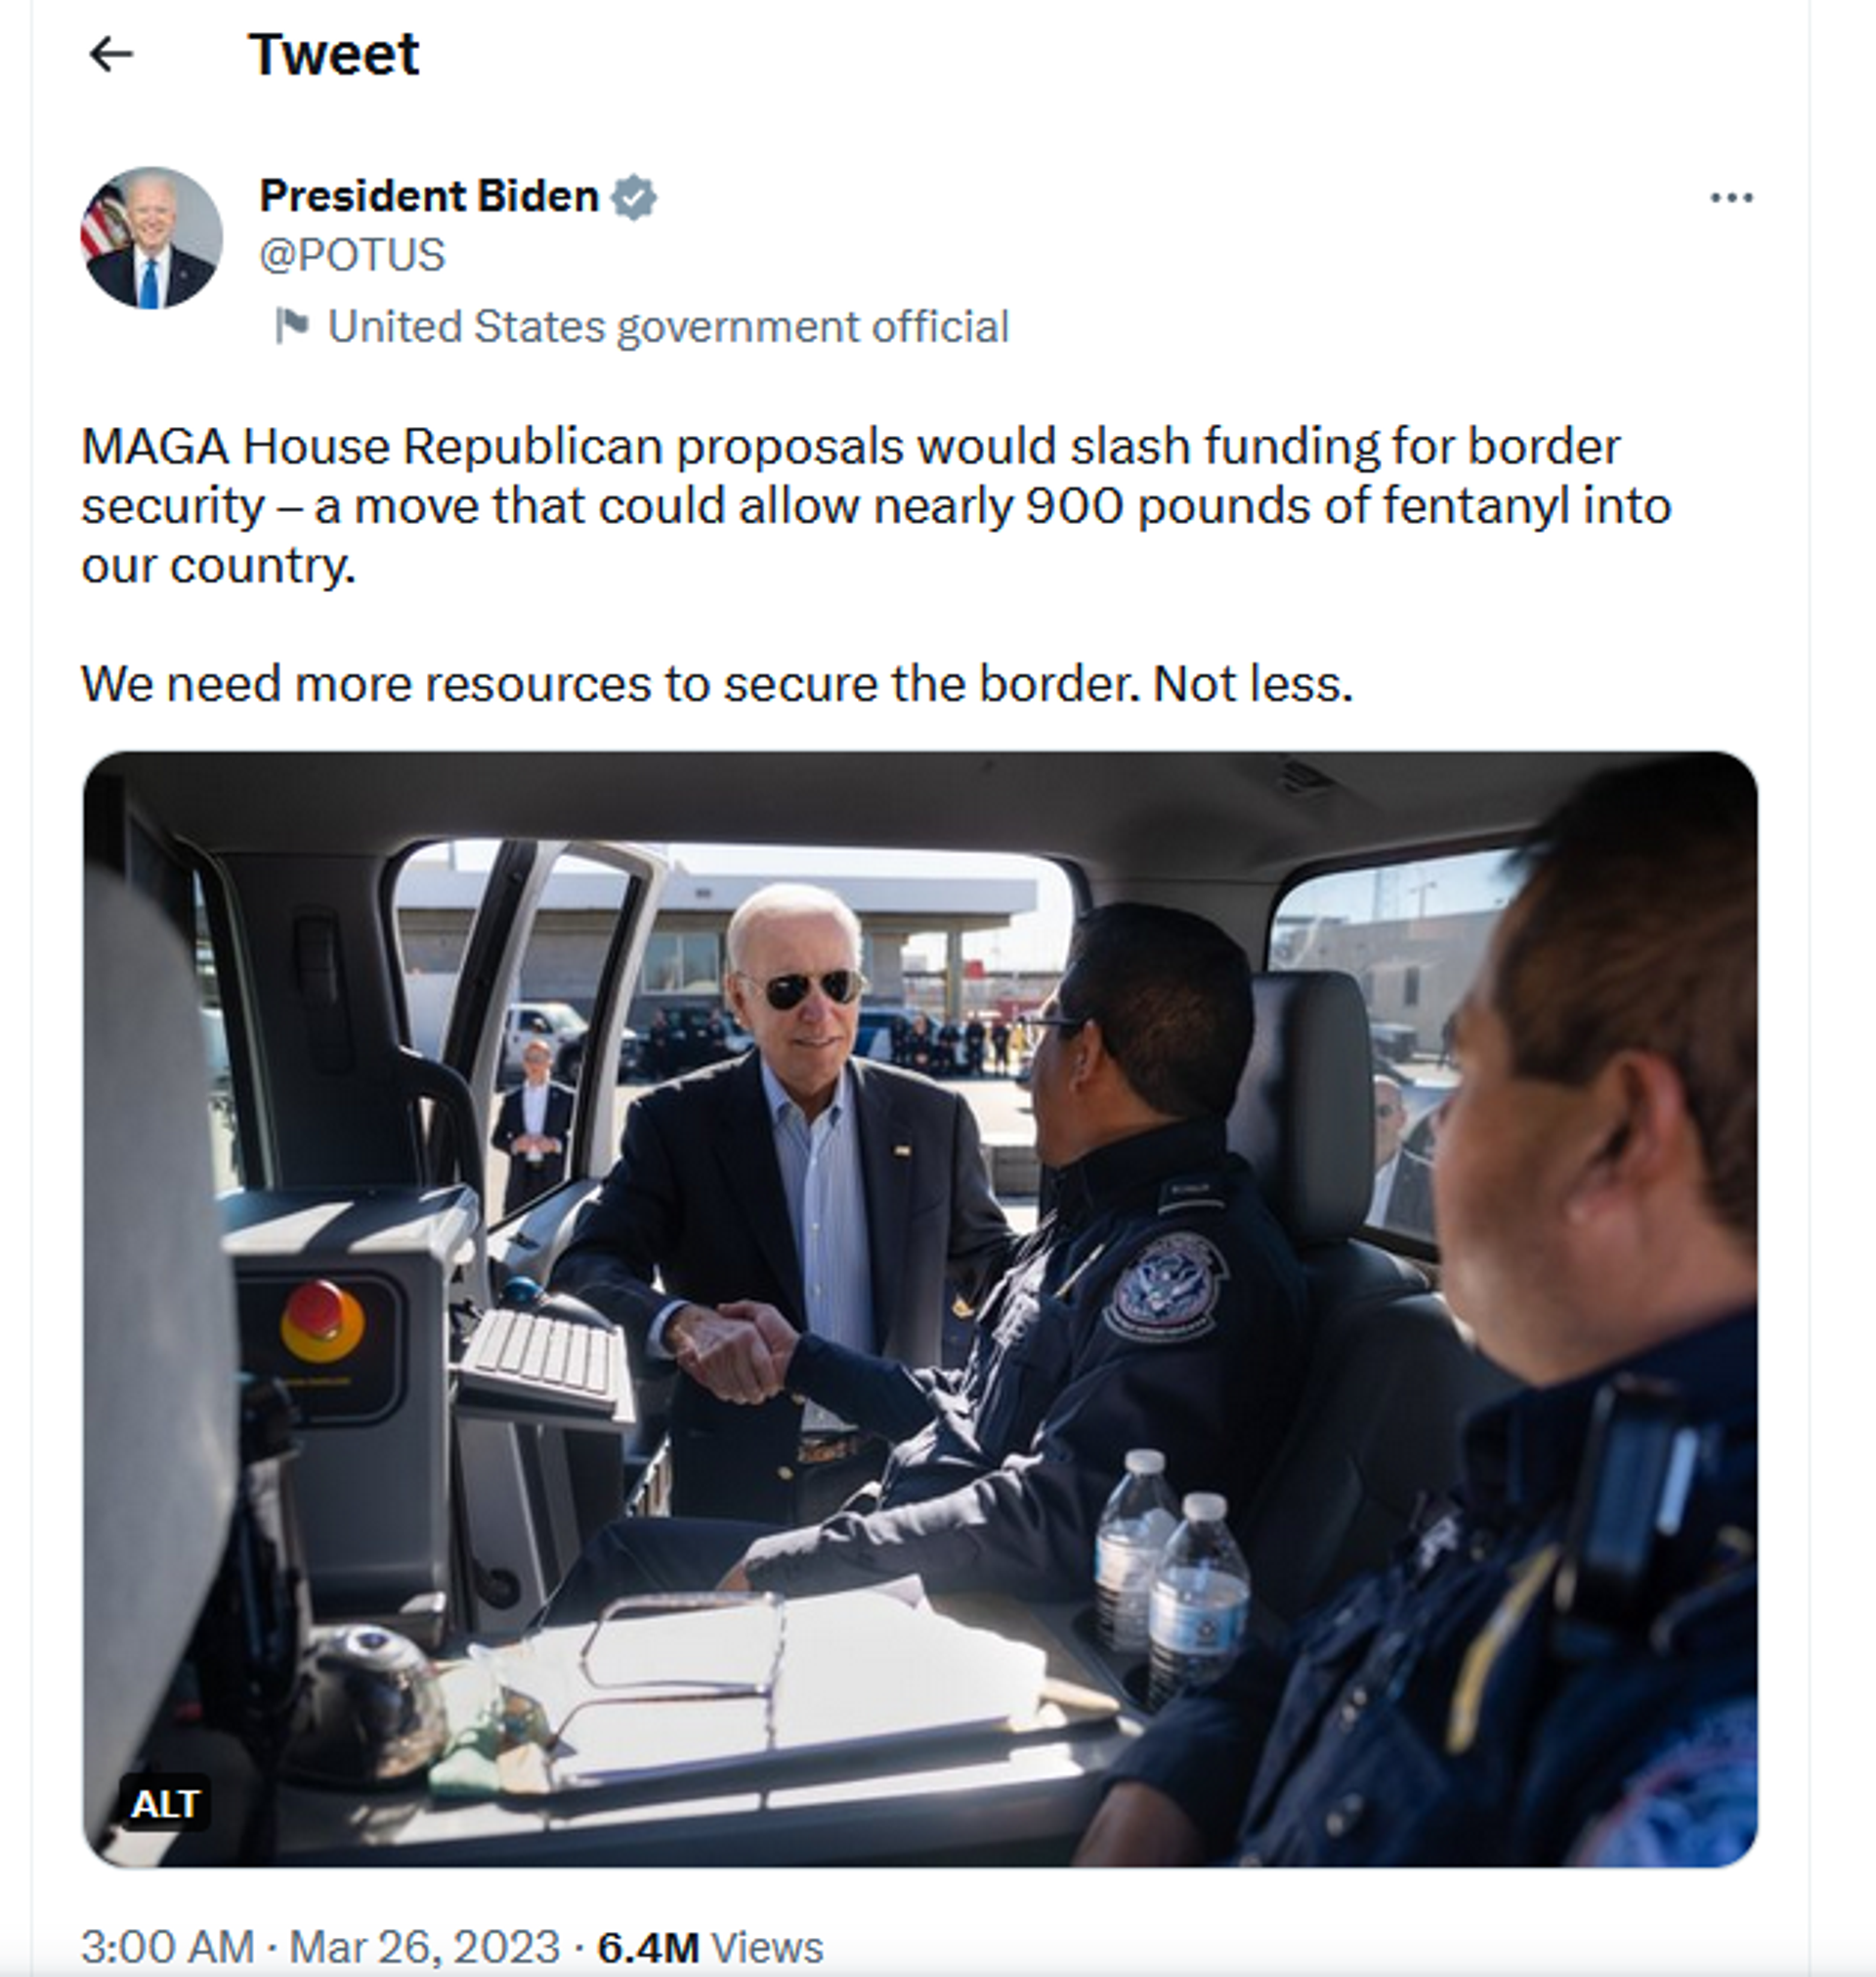 Tweet on President Biden's official Twitter account on the crisis at the US' southern border. - Sputnik International, 1920, 26.03.2023